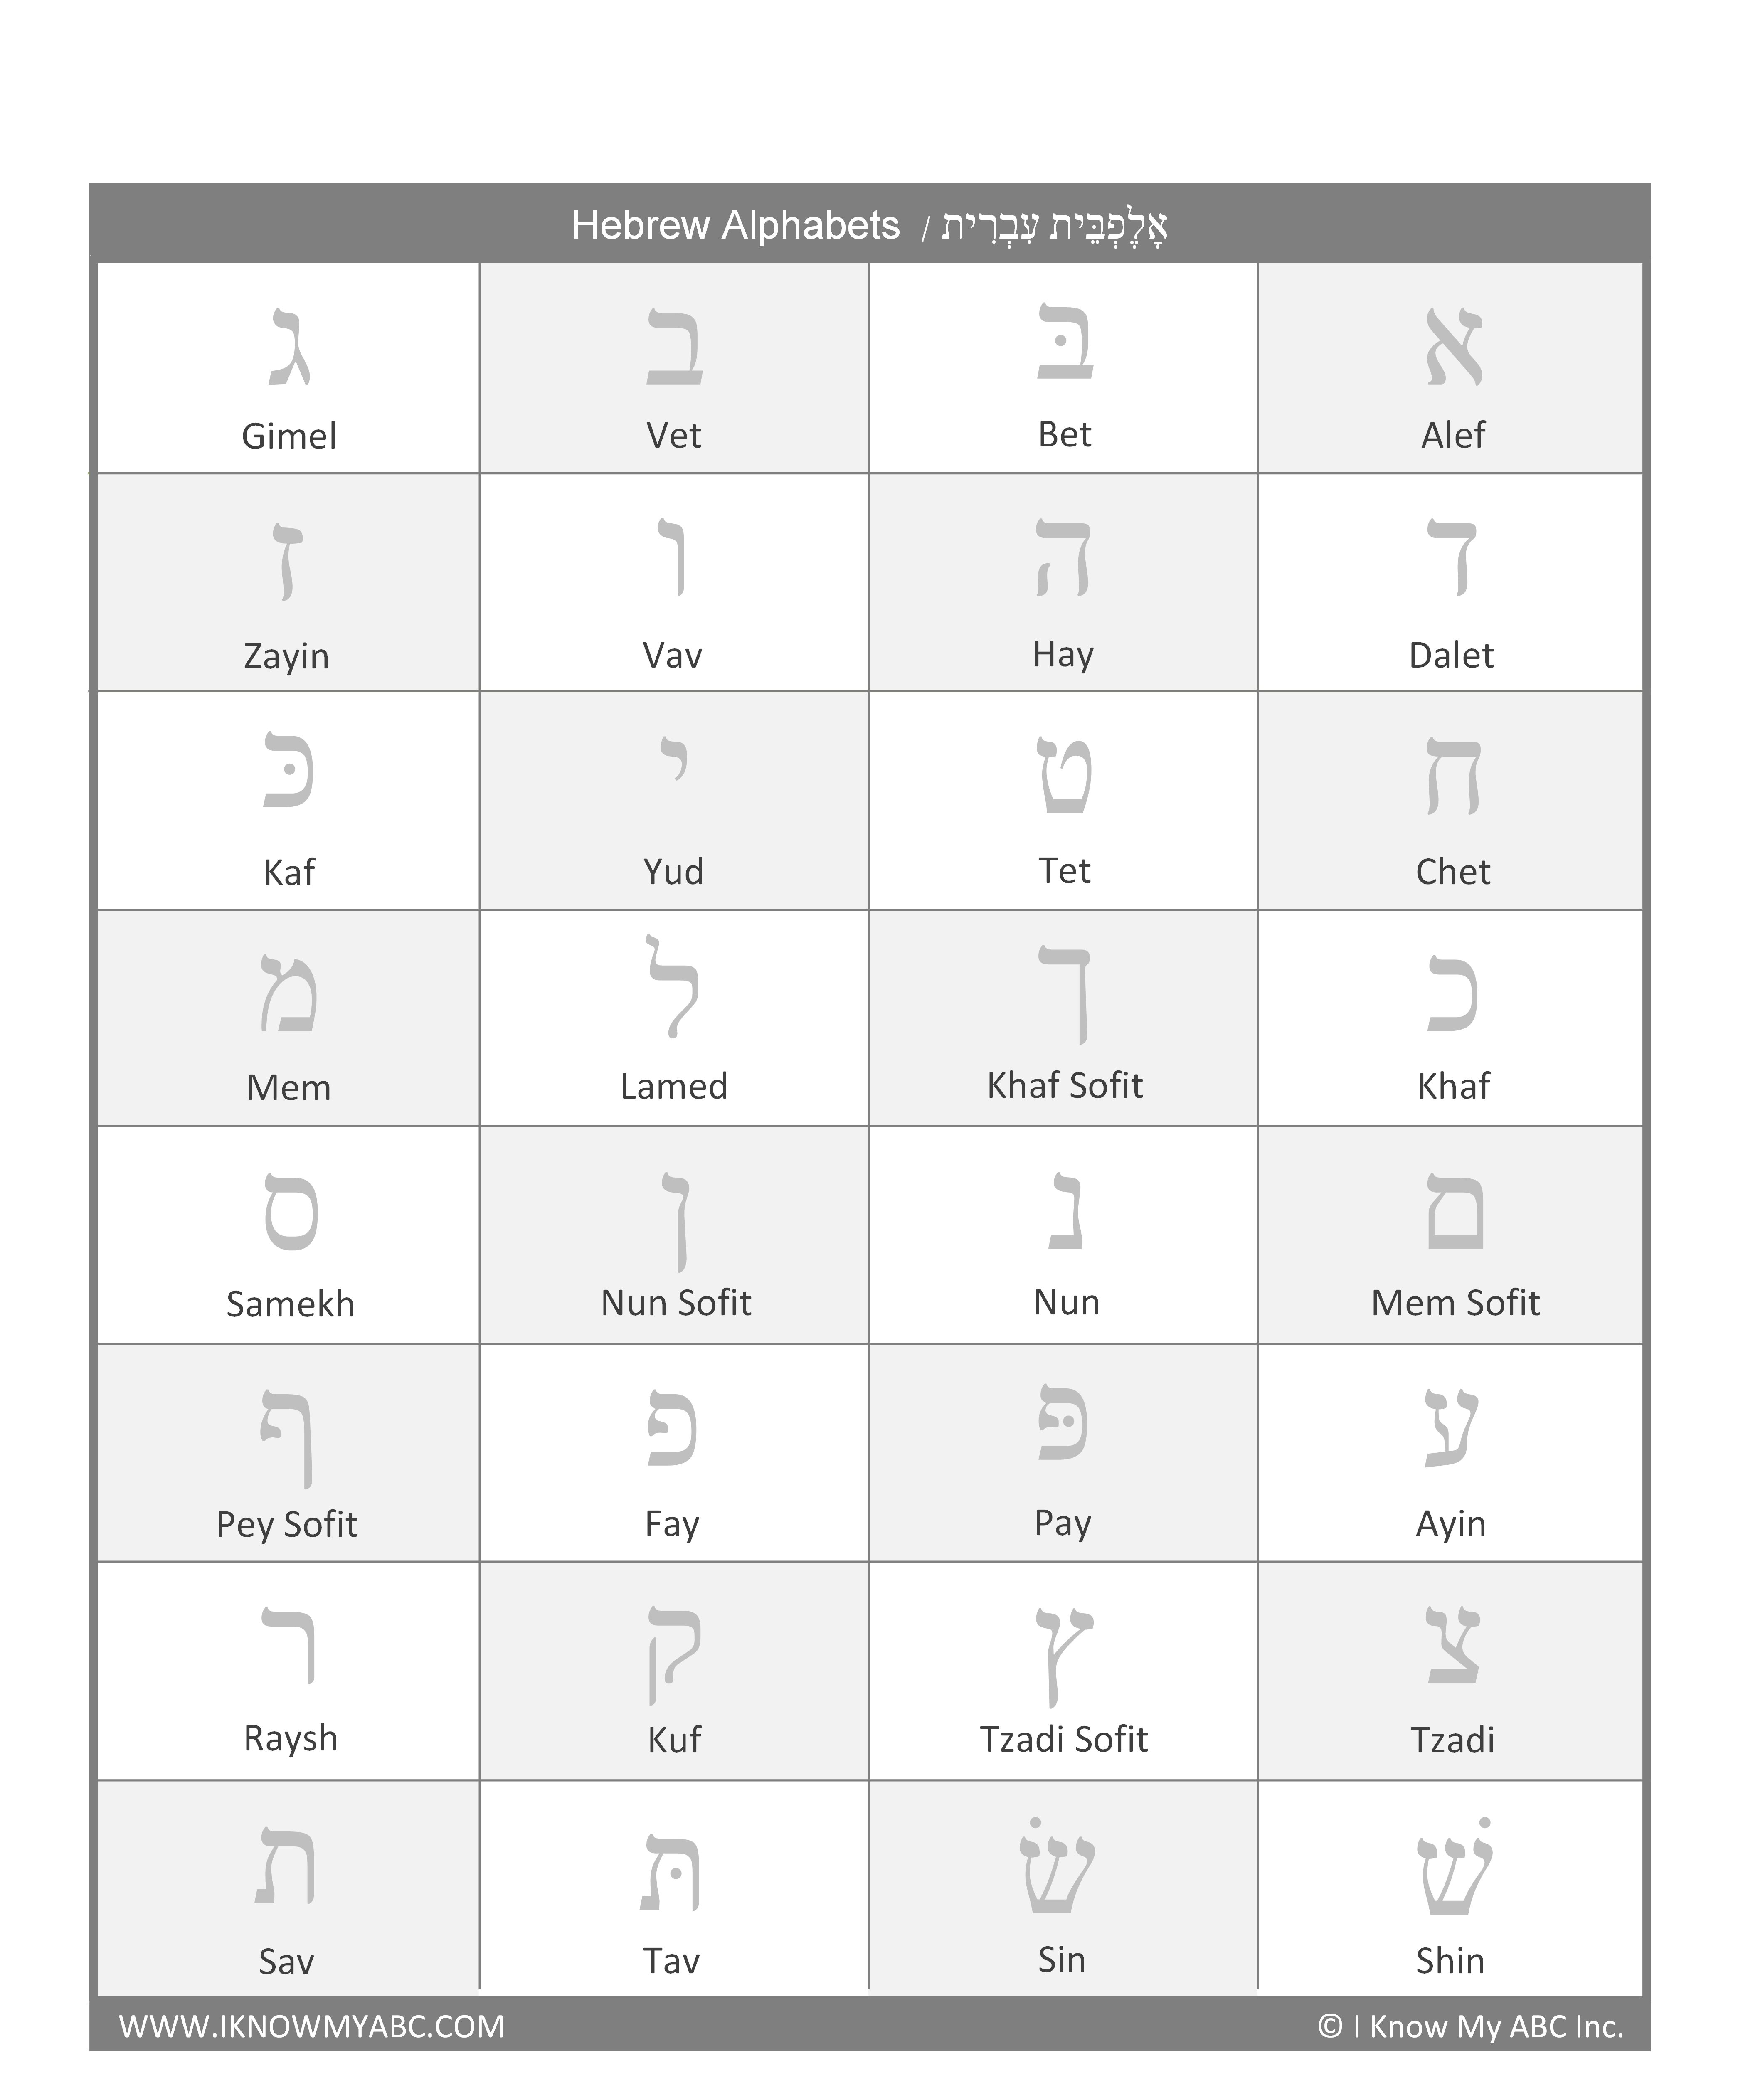 Learn Hebrew Alphabet Free Educational Resources I Know My ABC Inc.